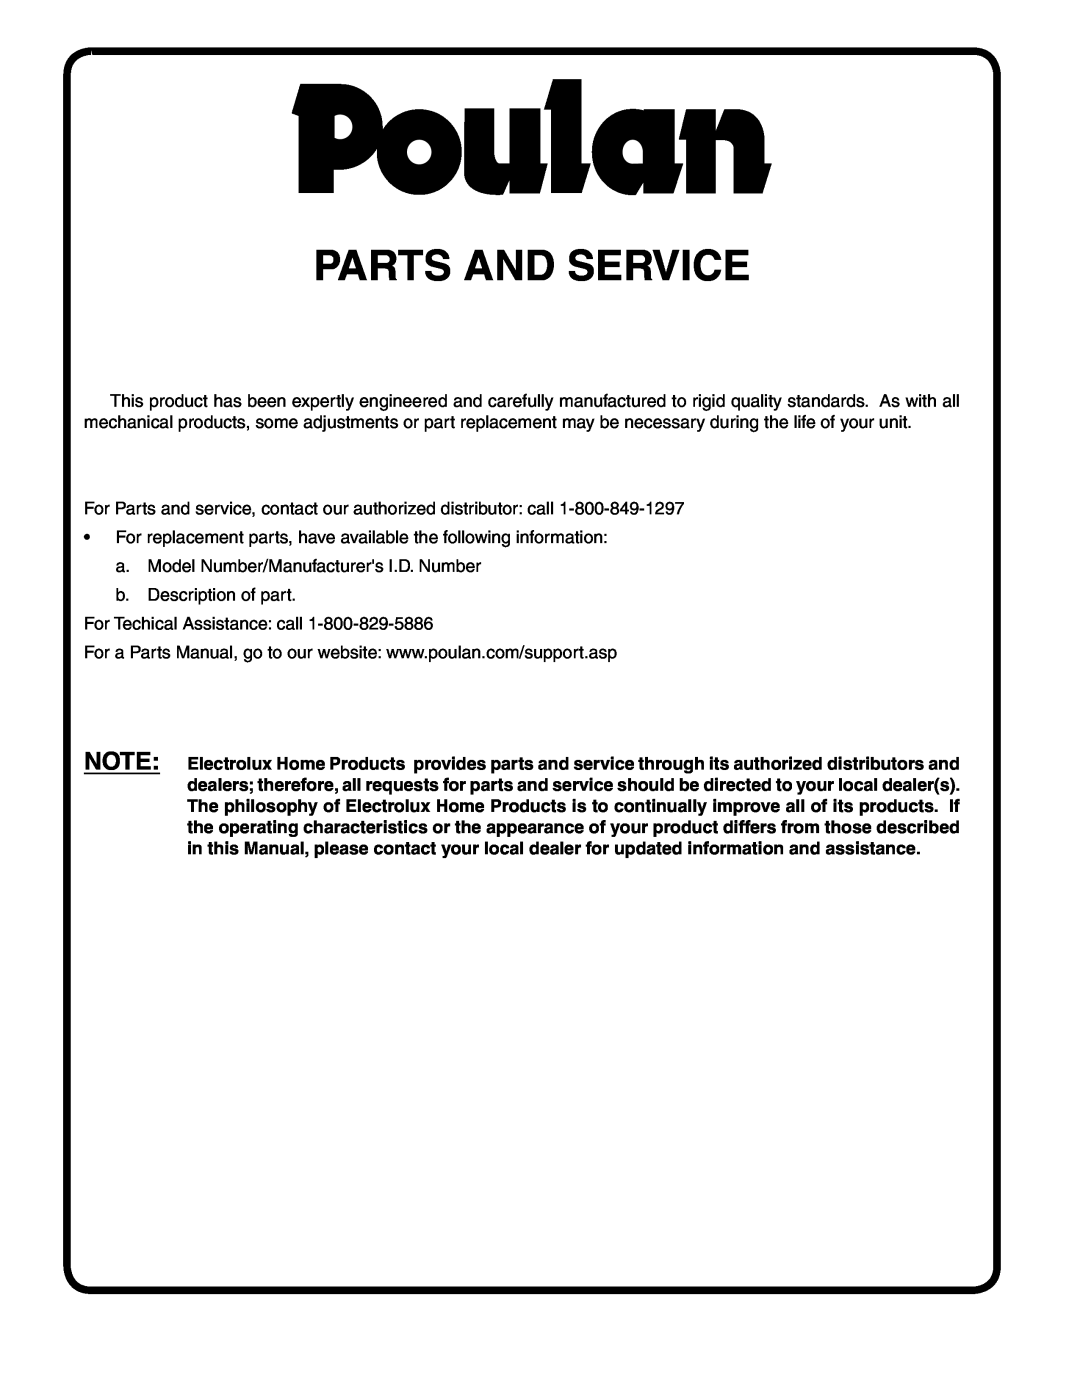 Poulan PD17542LT manual Parts And Service 